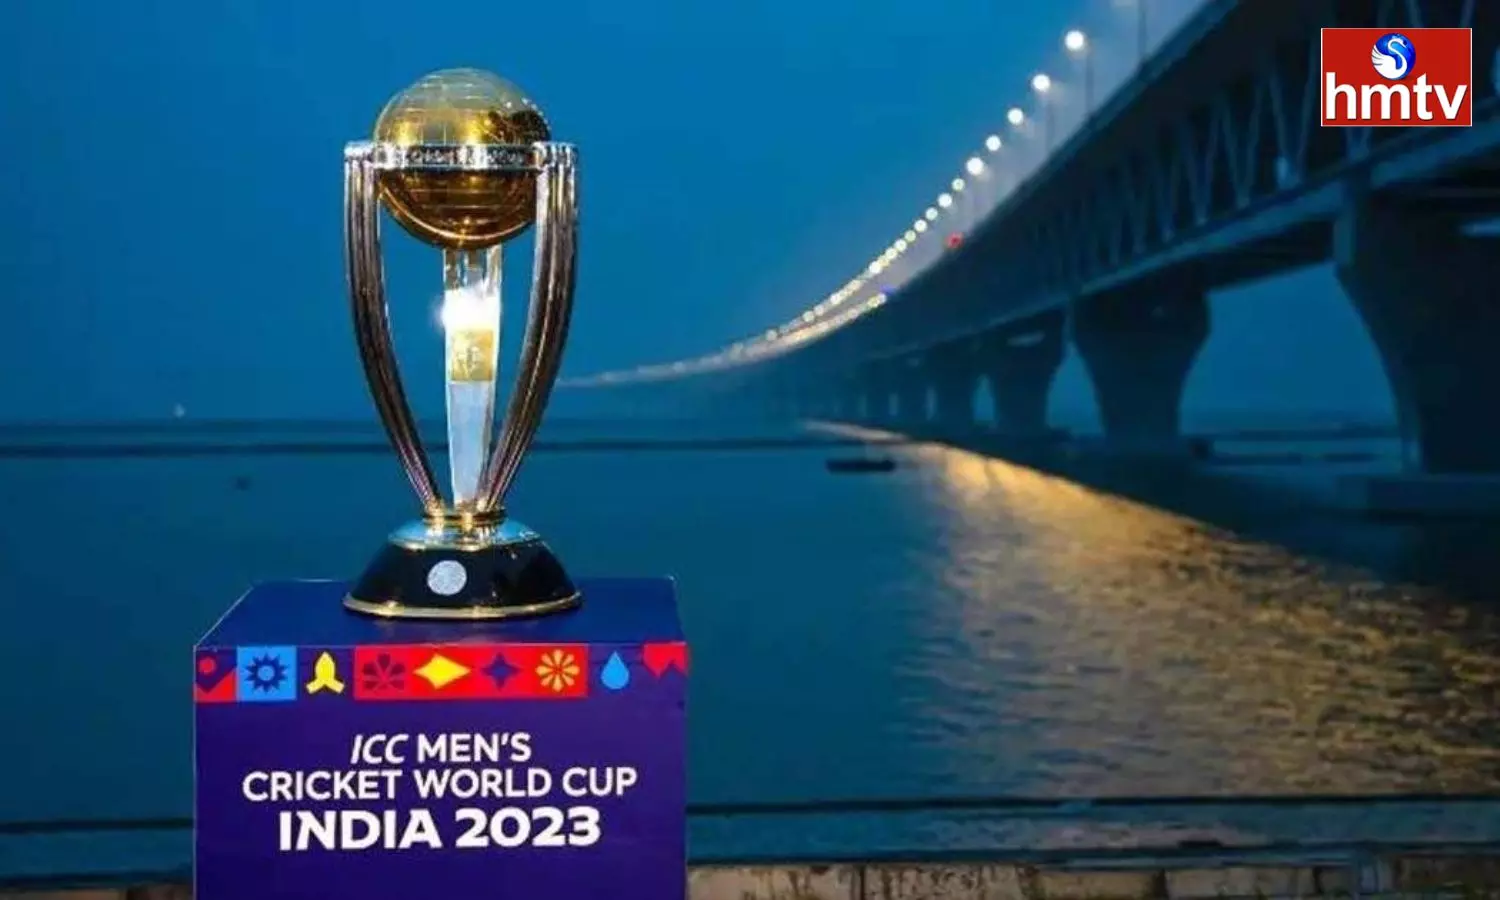 ICC Announced The Prize Money For ODI World Cup 2023 The Winners Are Set To Receive USD 4 Million Of The USD 10 Million Total Prize Pool